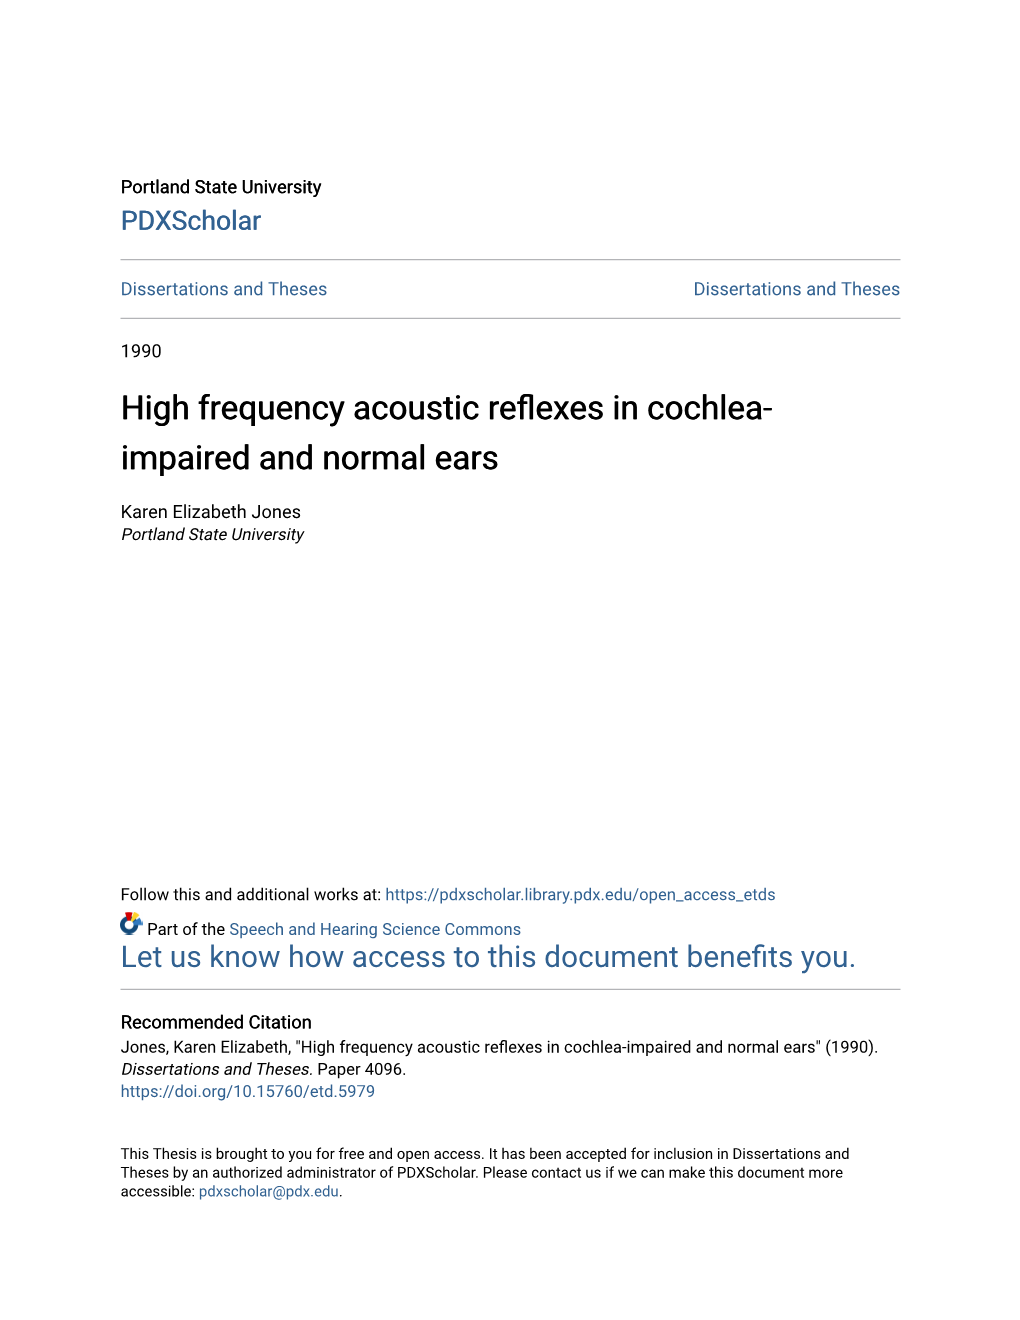 High Frequency Acoustic Reflexes in Cochlea-Impaired and Normal Ears" (1990)